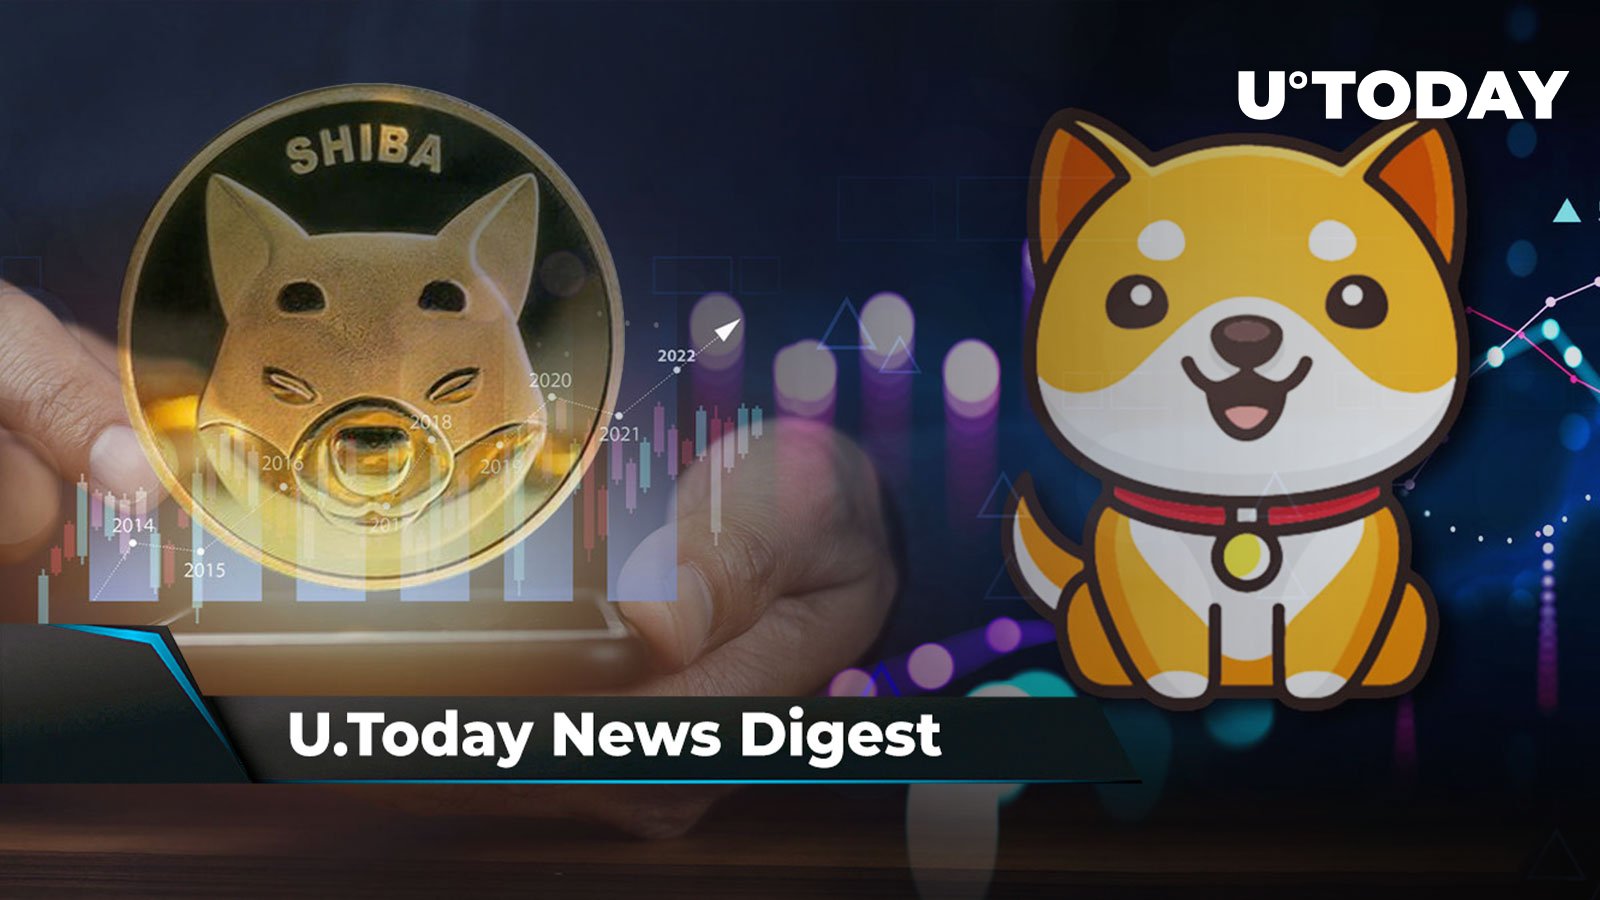 SHIB Hits Big New Milestone, Baby Doge Coin Spikes Briefly on Listing News, XRP to Become Available for Fiat Purchases in UK and France: Crypto News Digest by U.Today